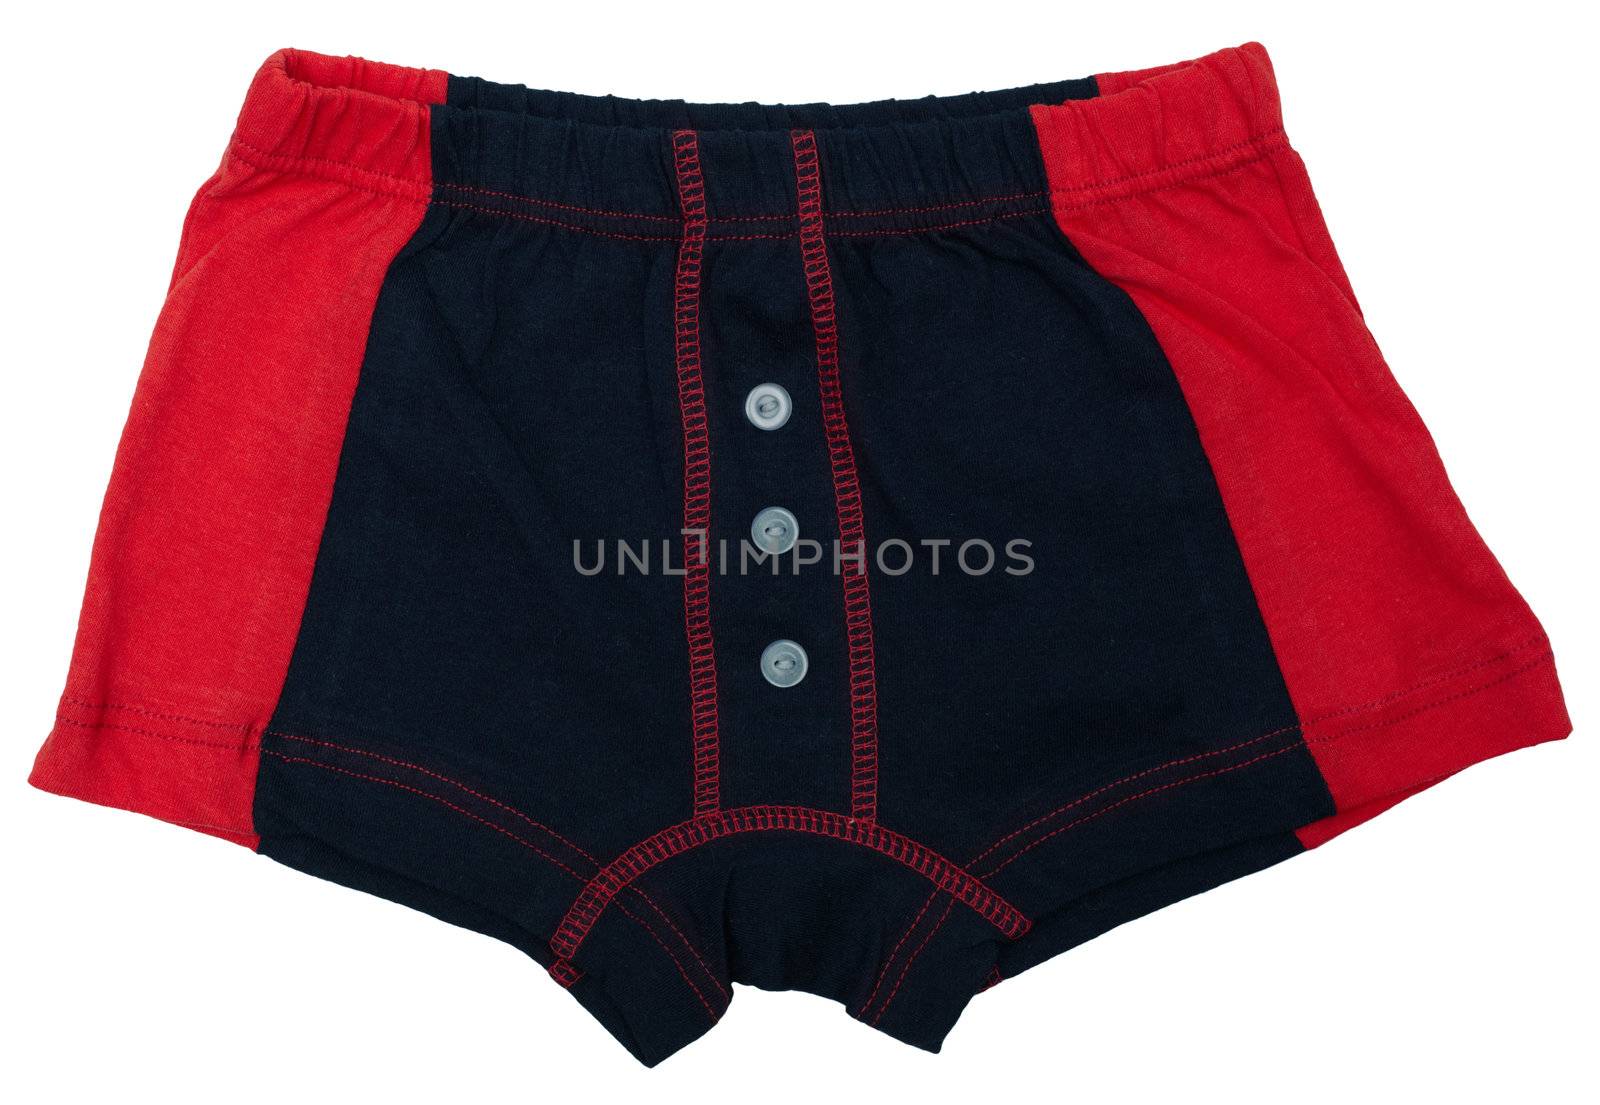 Children's underwear - black and red colors isolated on white background